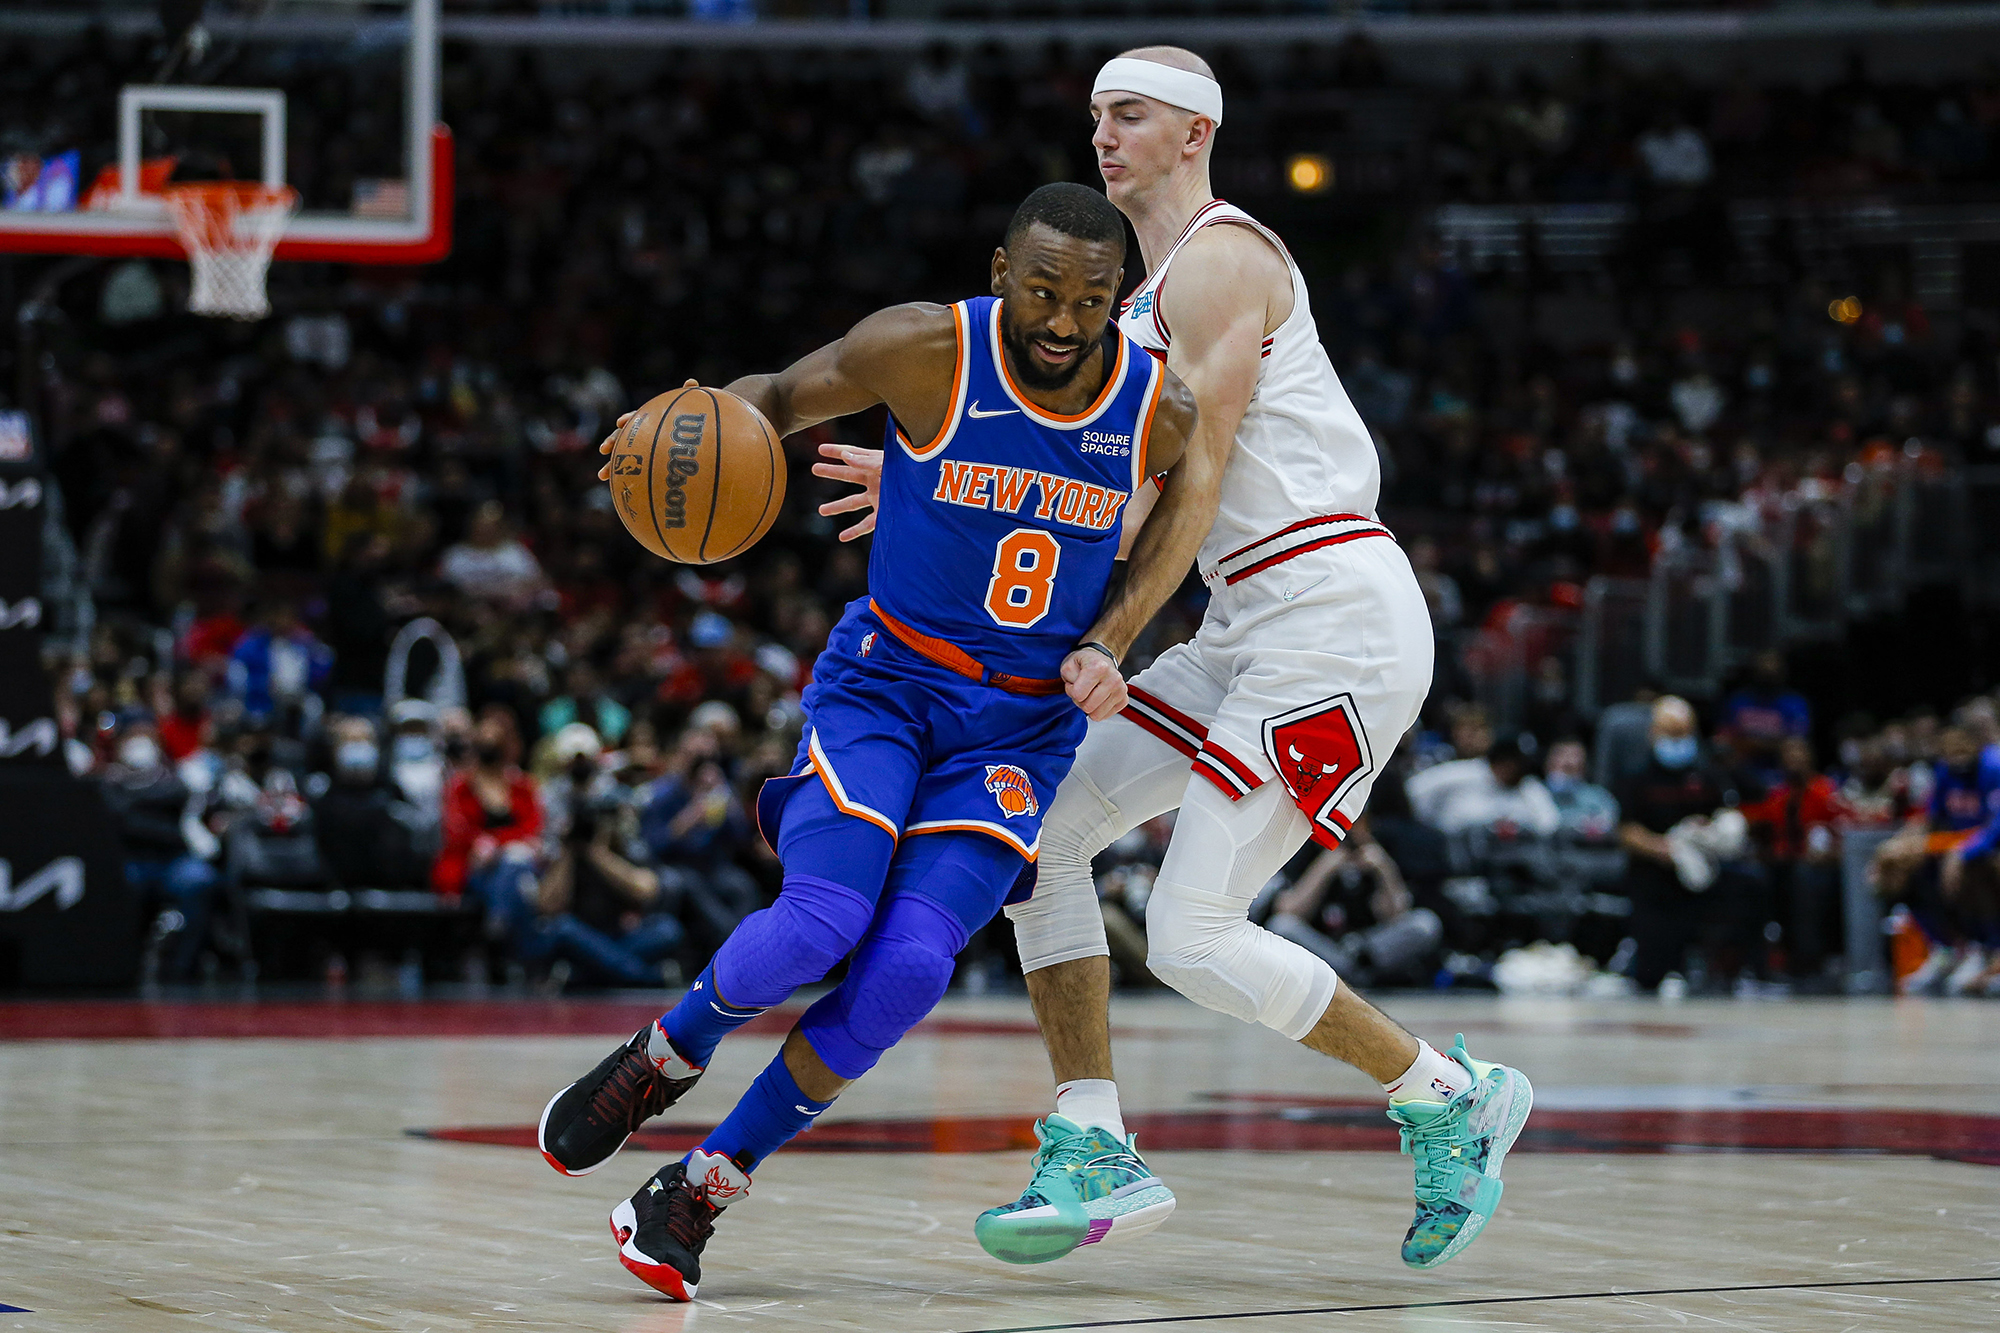 Kemba Walker struggles in rare serve-to-serve time out in Knicks’ loss